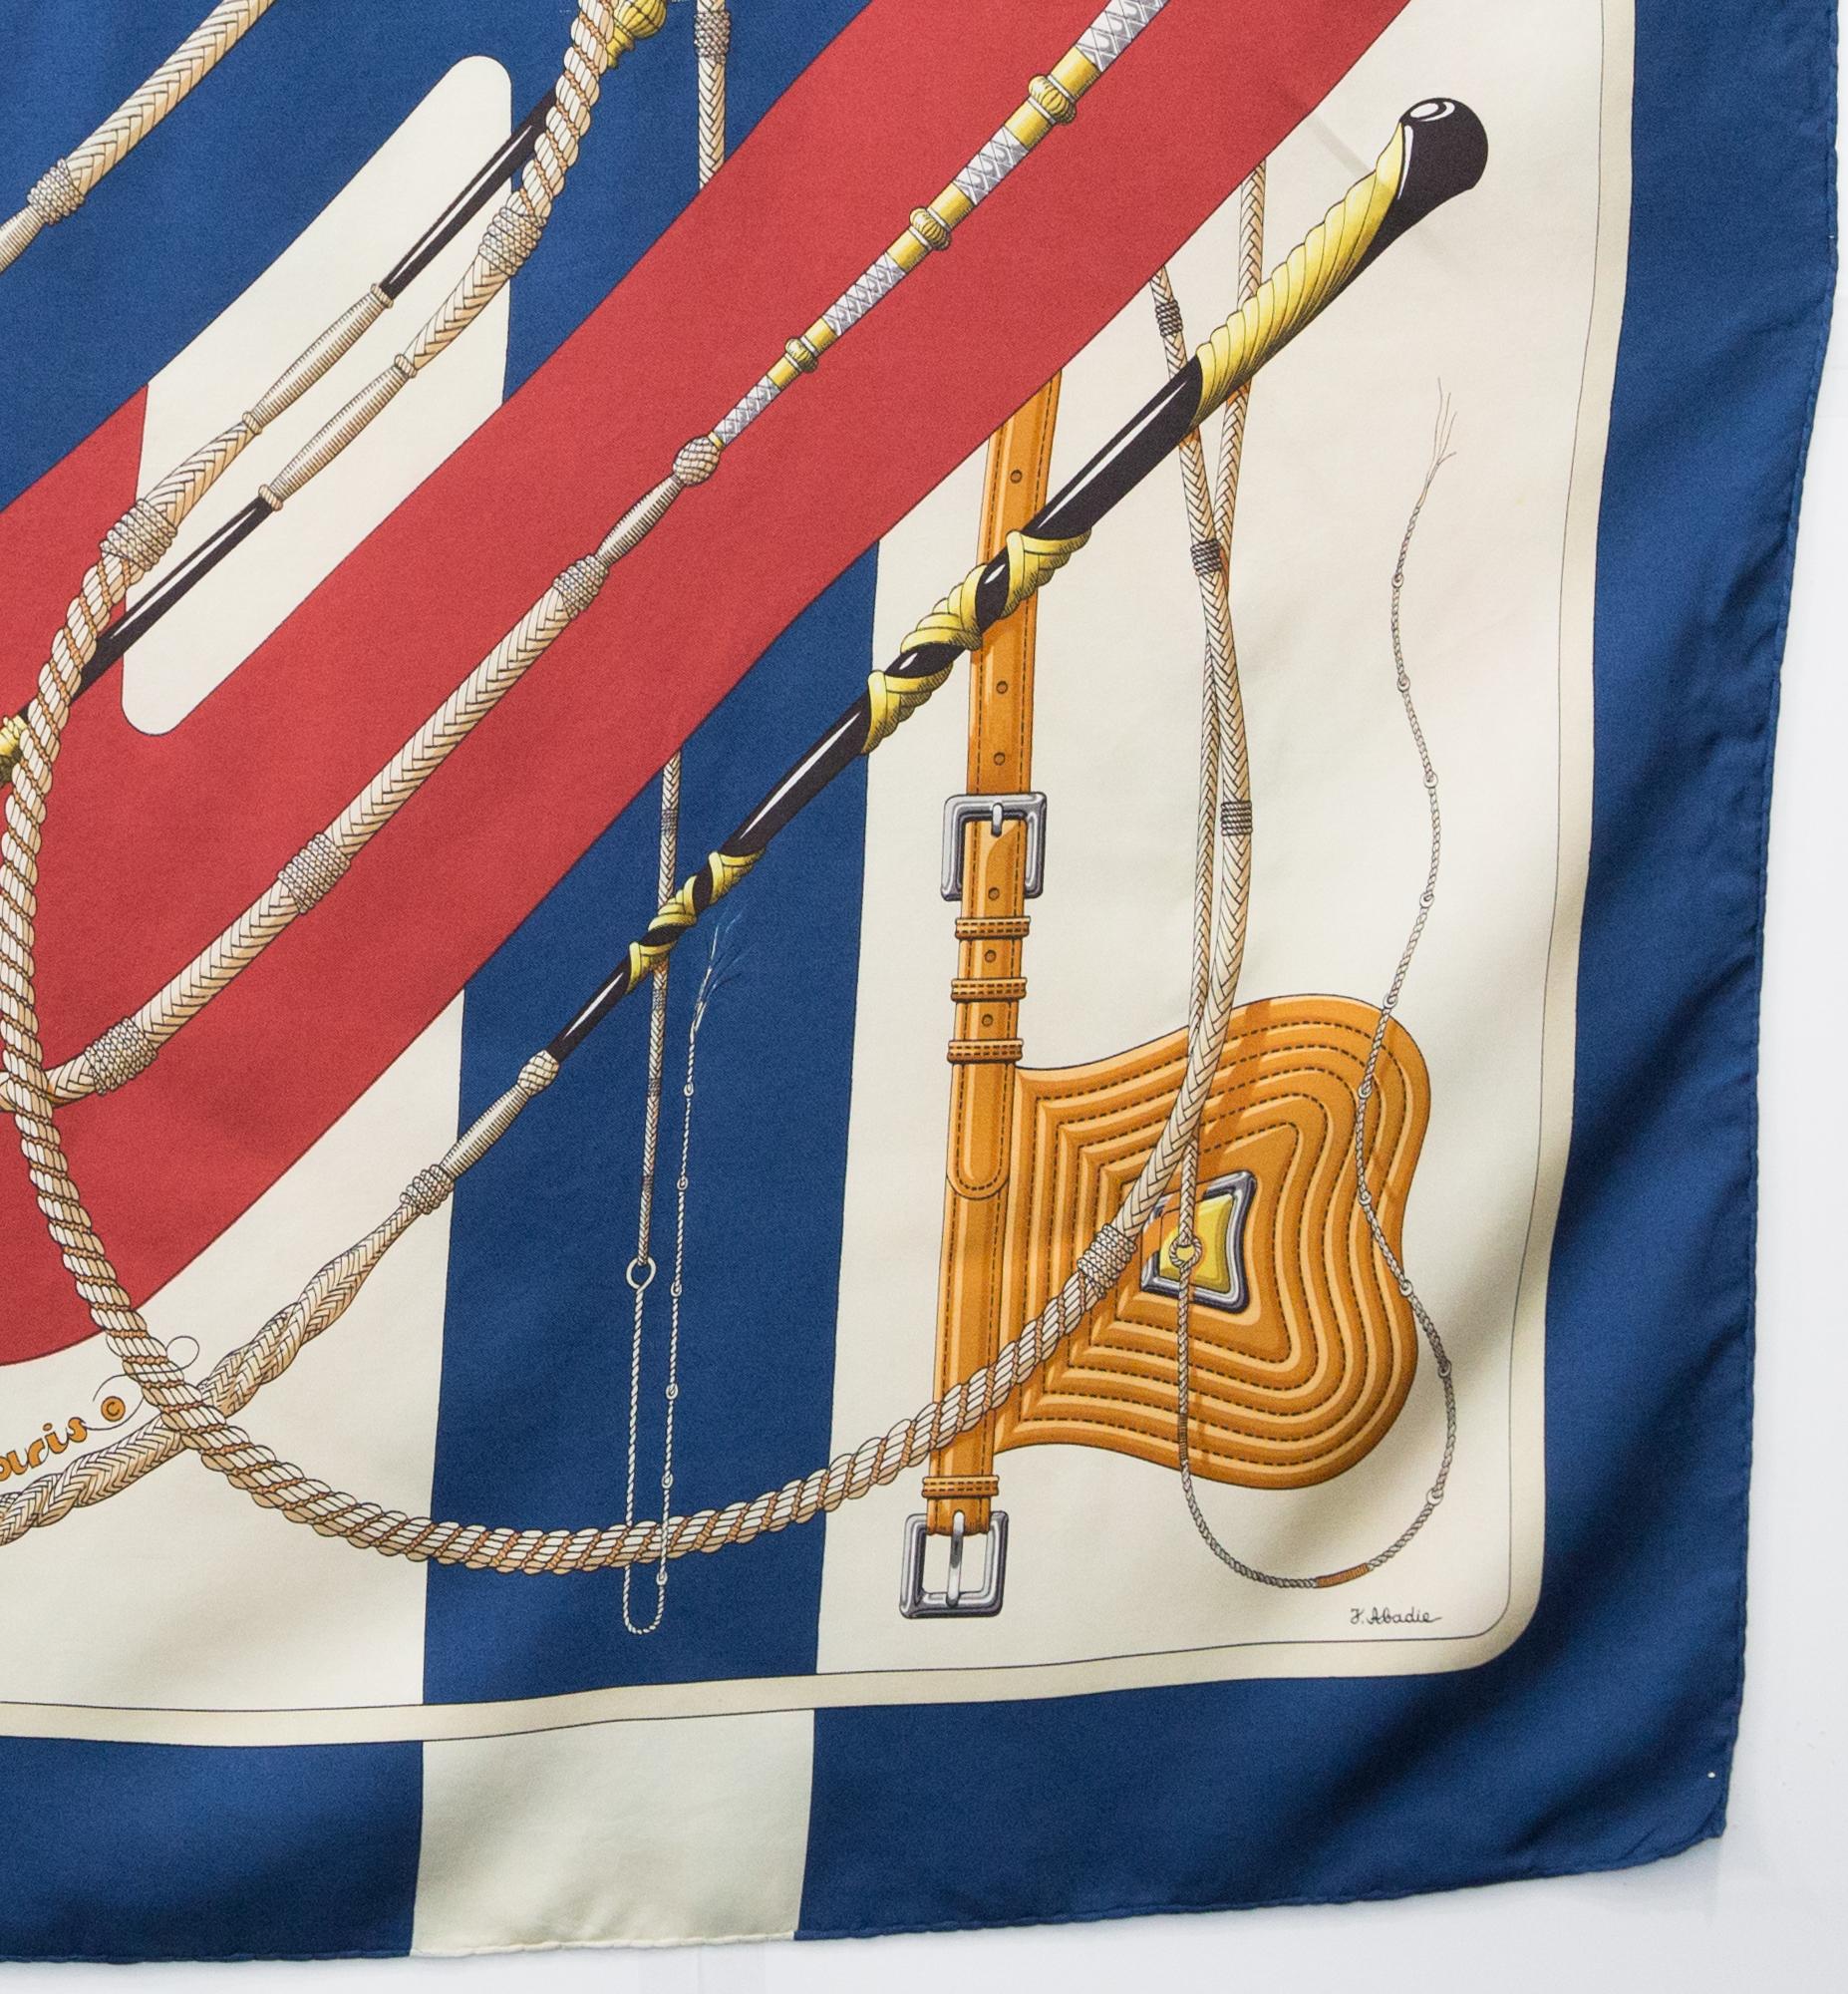 1979 Hermes Clic Clac by J Abadie Silk Scarf In Good Condition For Sale In Paris, FR